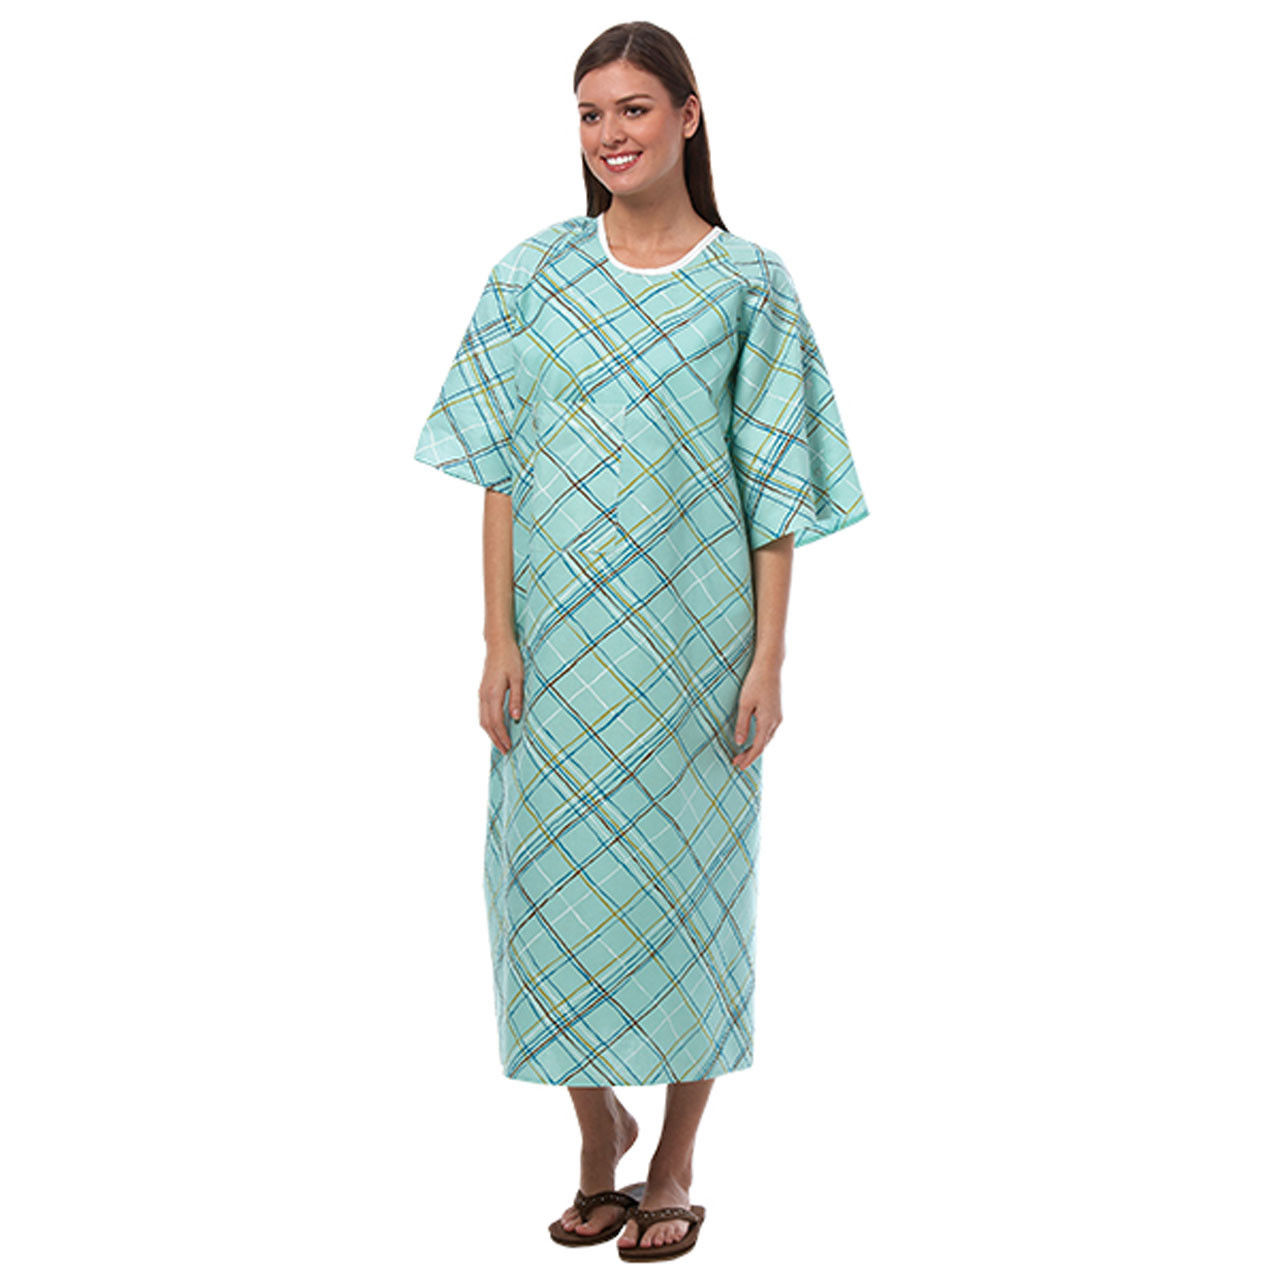 Fashion Seal Hospital Gown, Green - In Bulk Case of 240 Questions & Answers